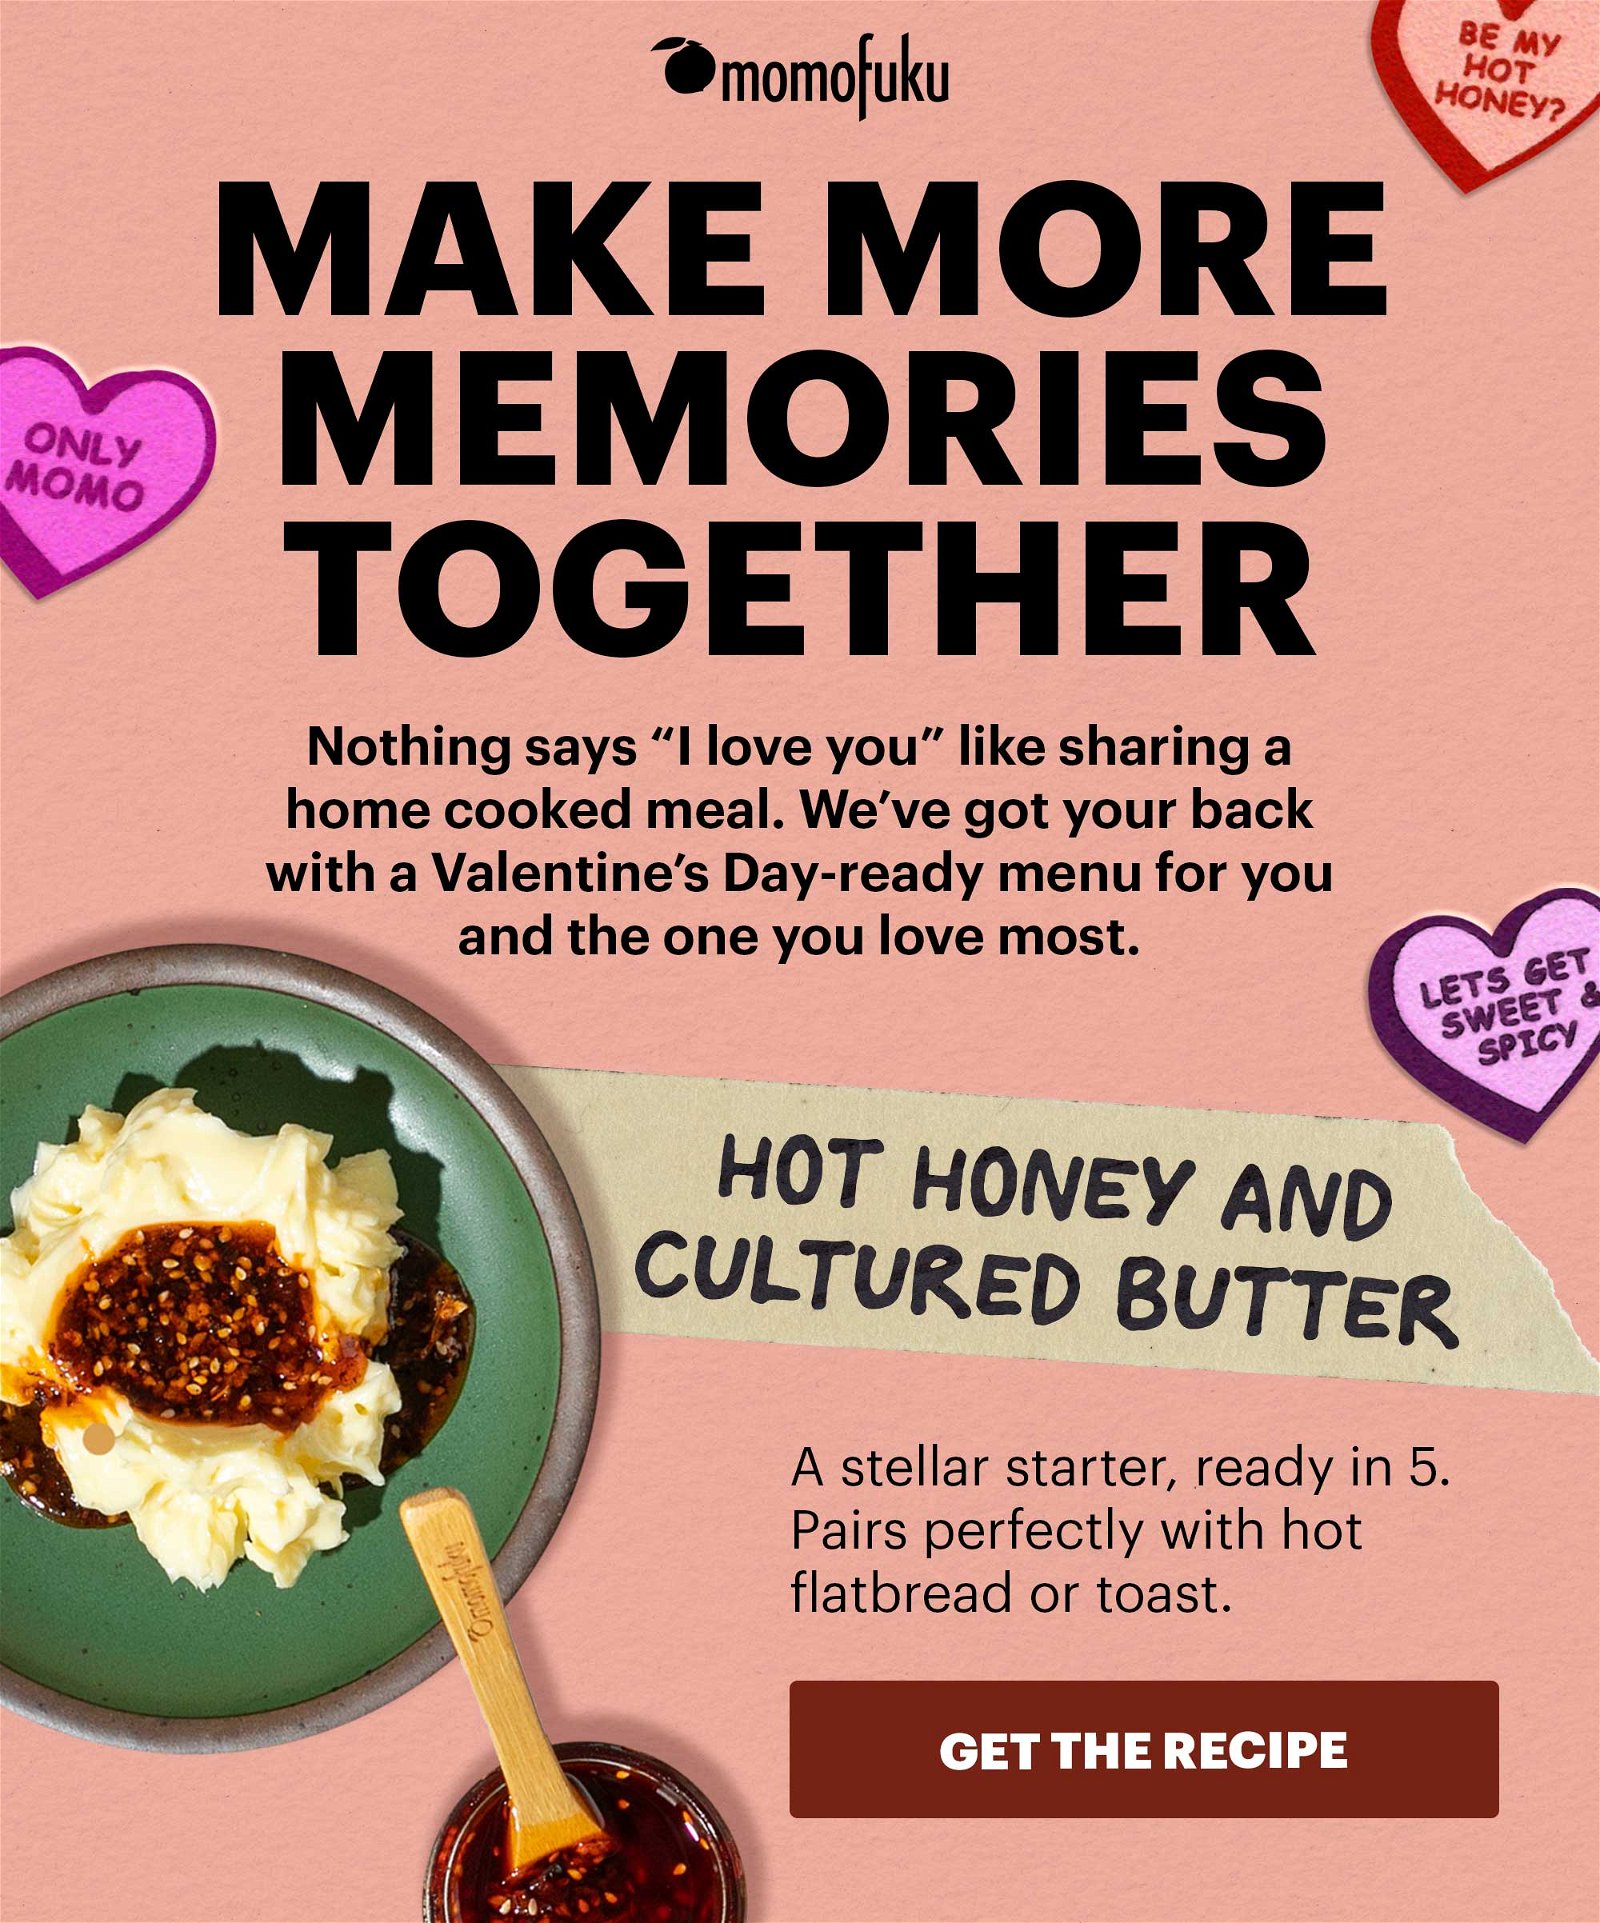 MAKE MORE MEMORIES TOGETHER. Nothing says "I love you" like sharing a home cooked meal. We've got your back with a Valentine's Day-ready menu for you and the one you love the most. HOT HONEY AND CULTURED BUTTER. A stellar starter, ready in 5. Pairs perfectly with hot flatbread or toast. GET THE RECIPE.